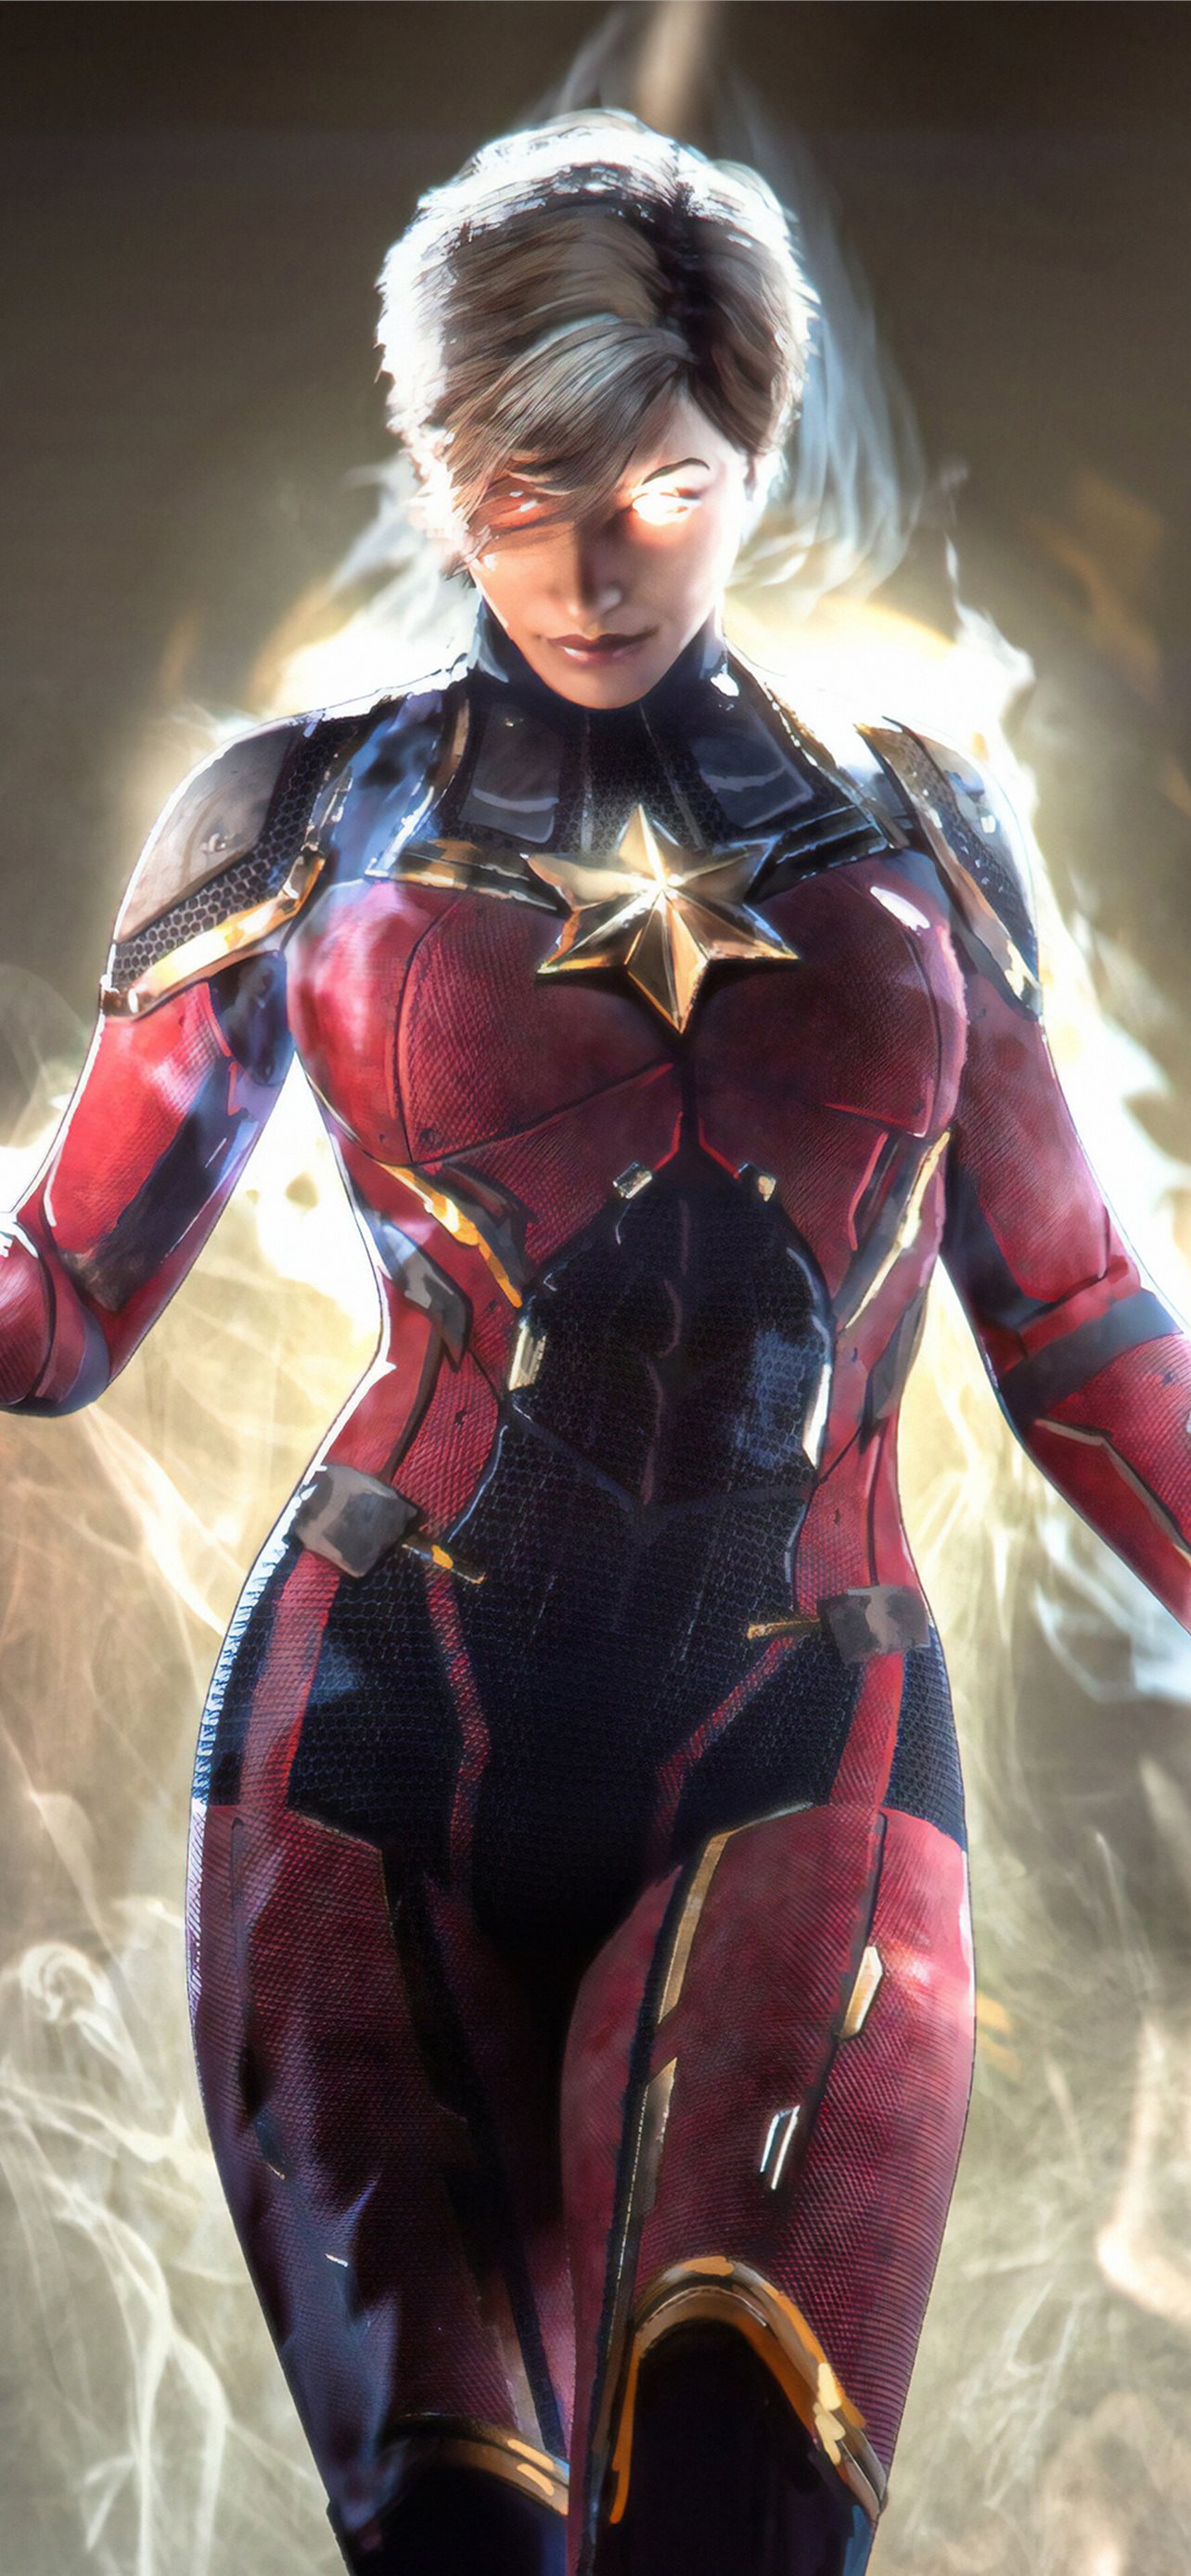 325177 Captain Marvel 4K phone HD Images Backgroun... iPhone Wallpapers  Free Download